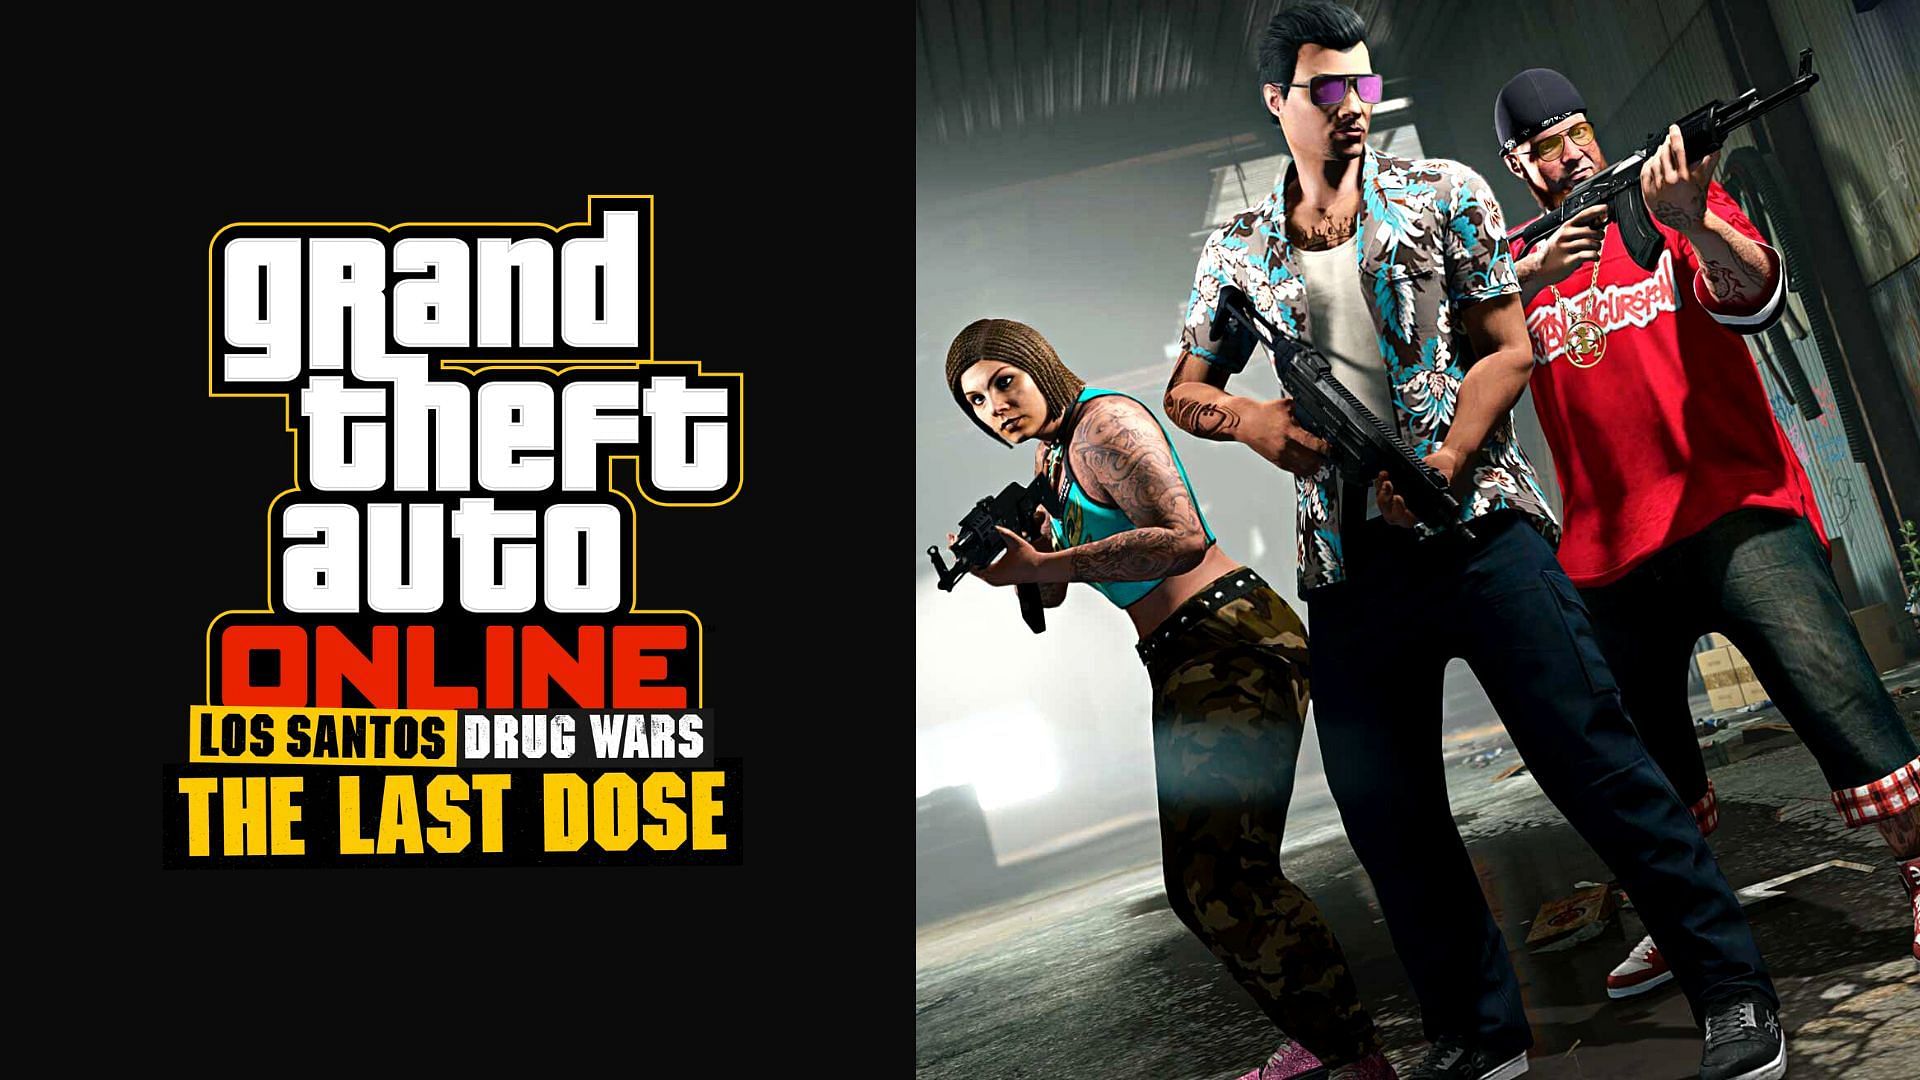 A brief about the new report on the new GTA Online Last Dose Mission 1 debuted in the latest Los Santos Drug Wars update (Image via Rockstar Games)